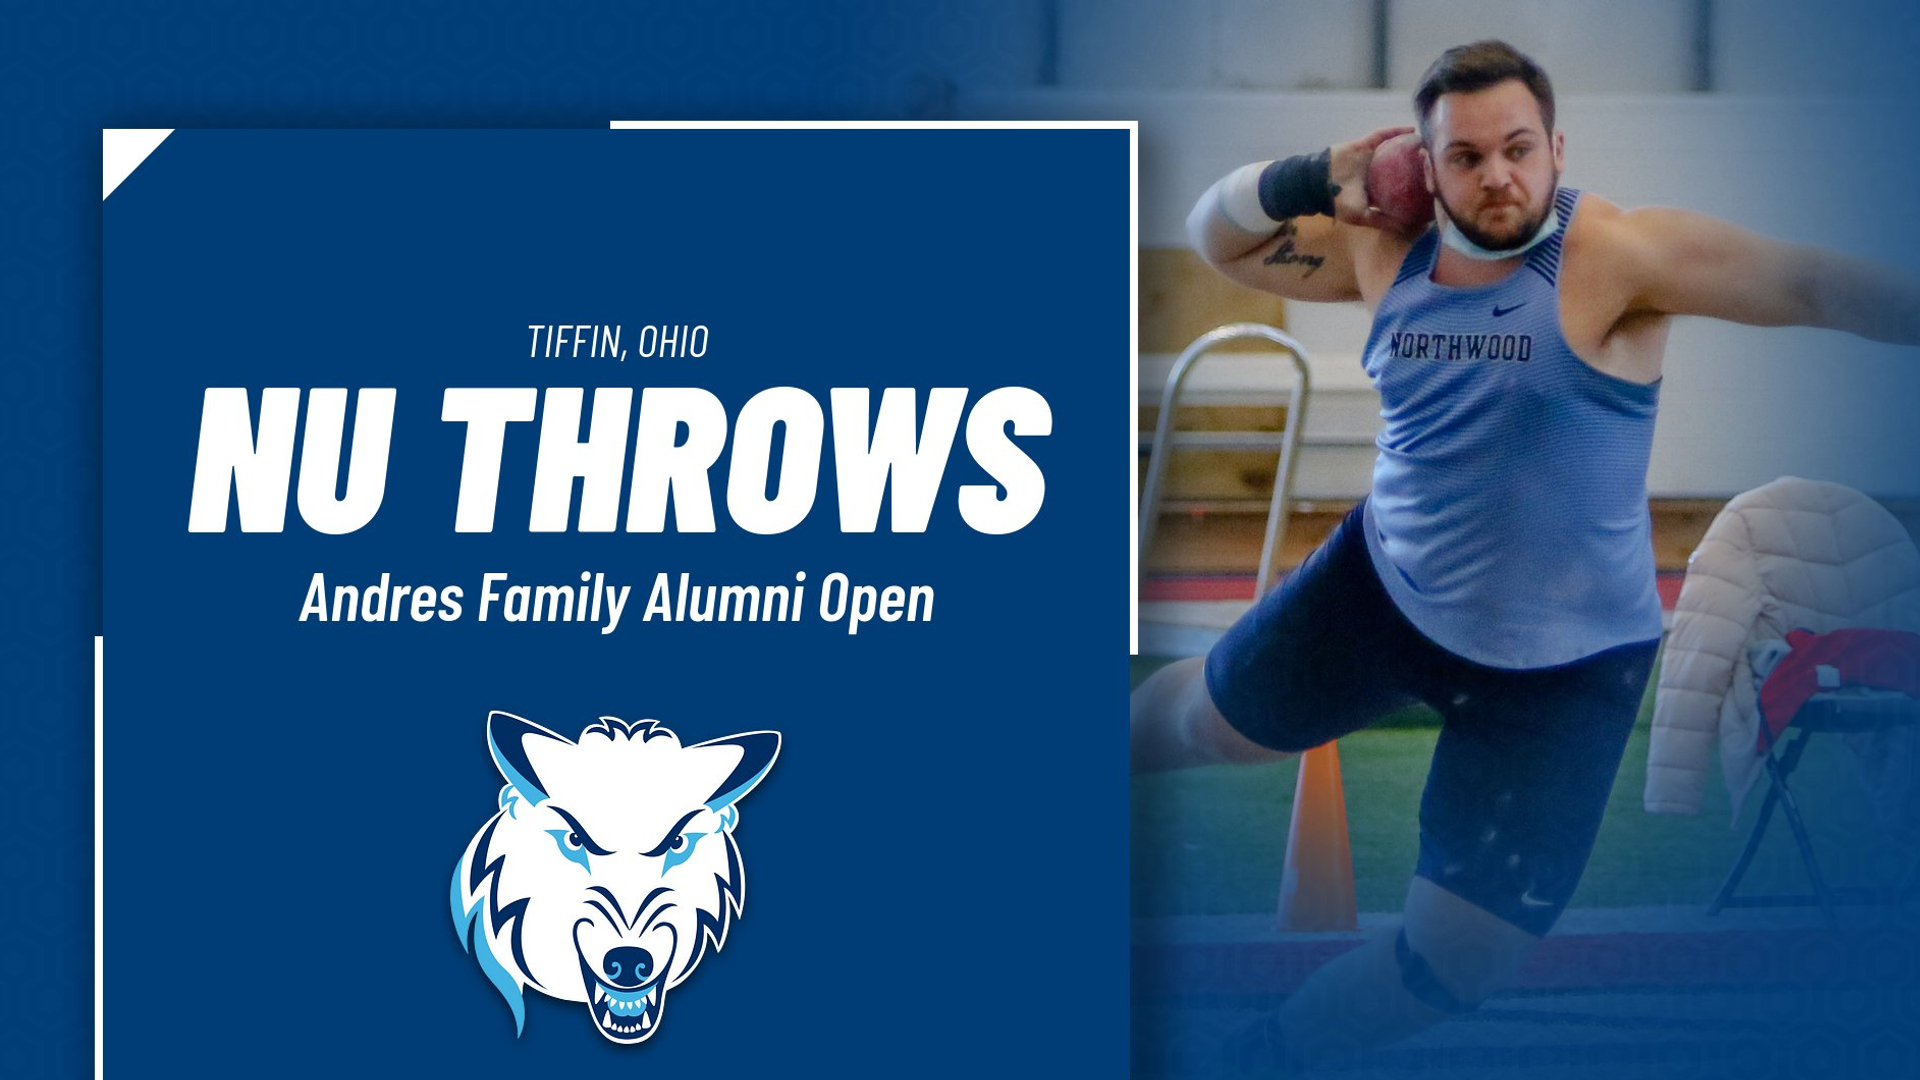 Throwers Compete At Andres Family Alumni Open